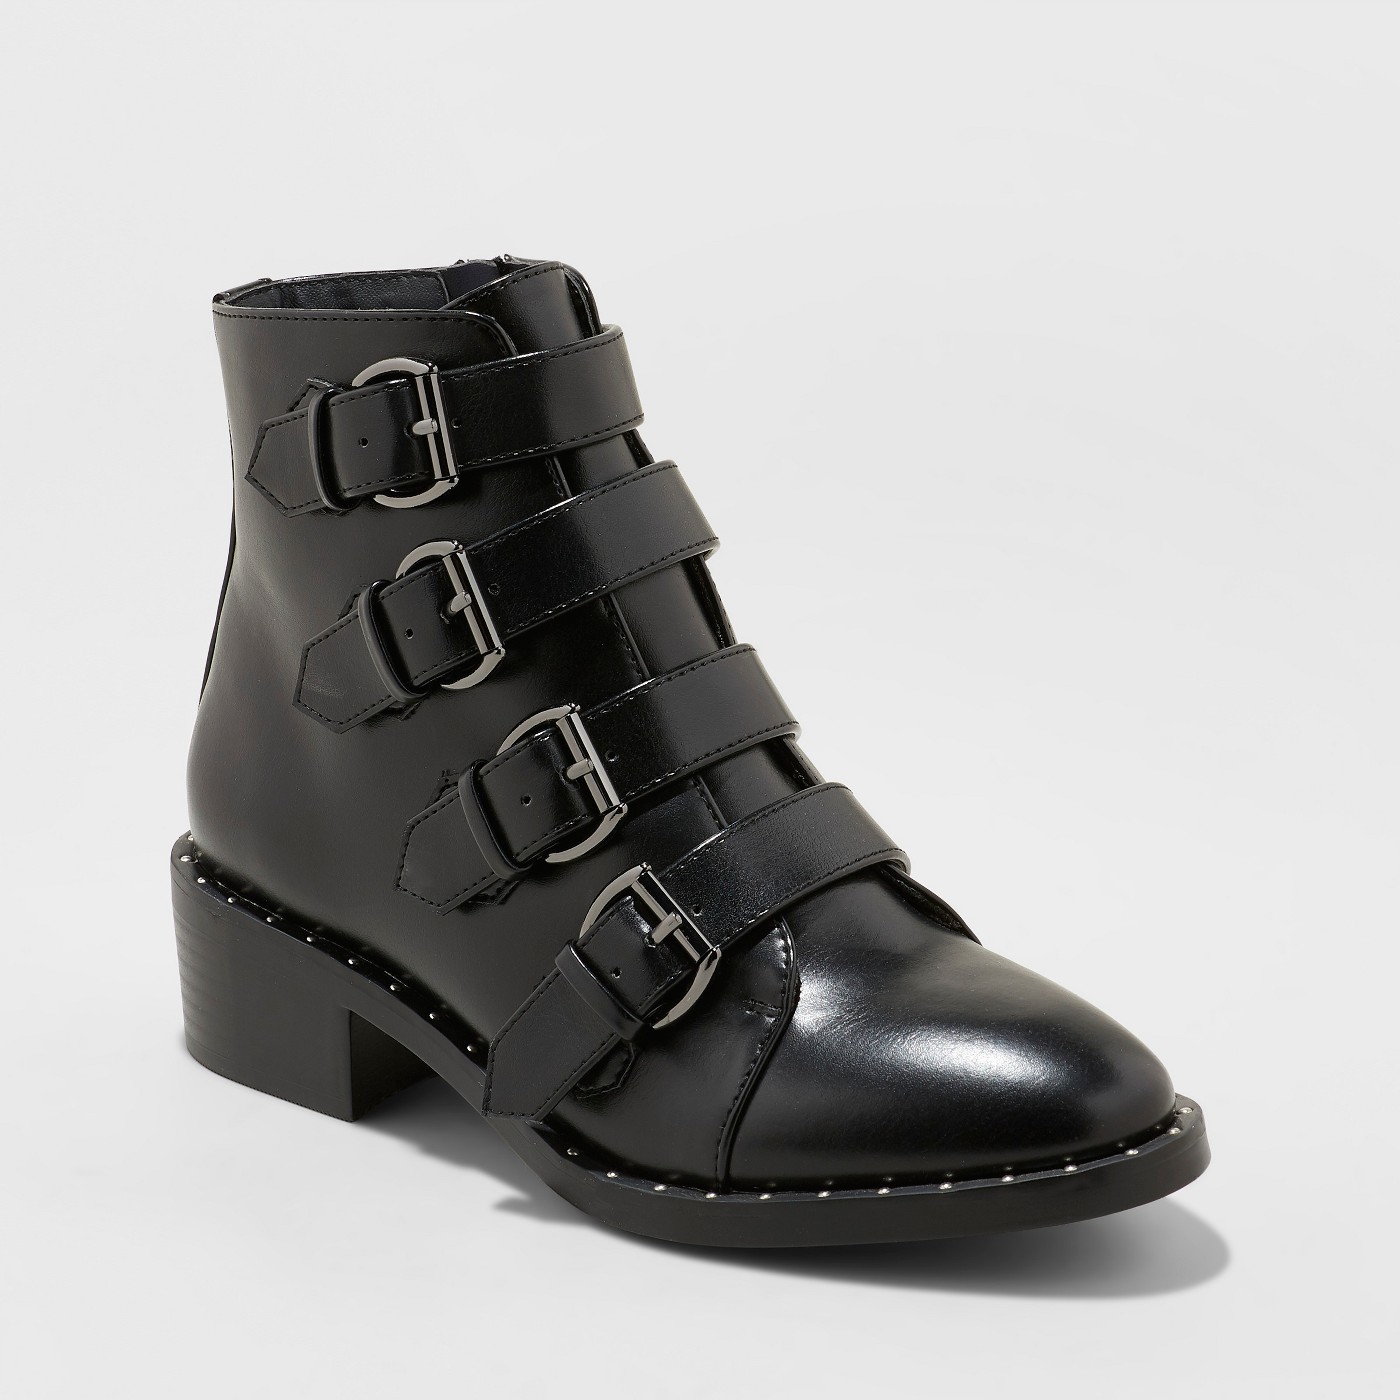 Target: A New Day Nikko Combat Boot - $38 